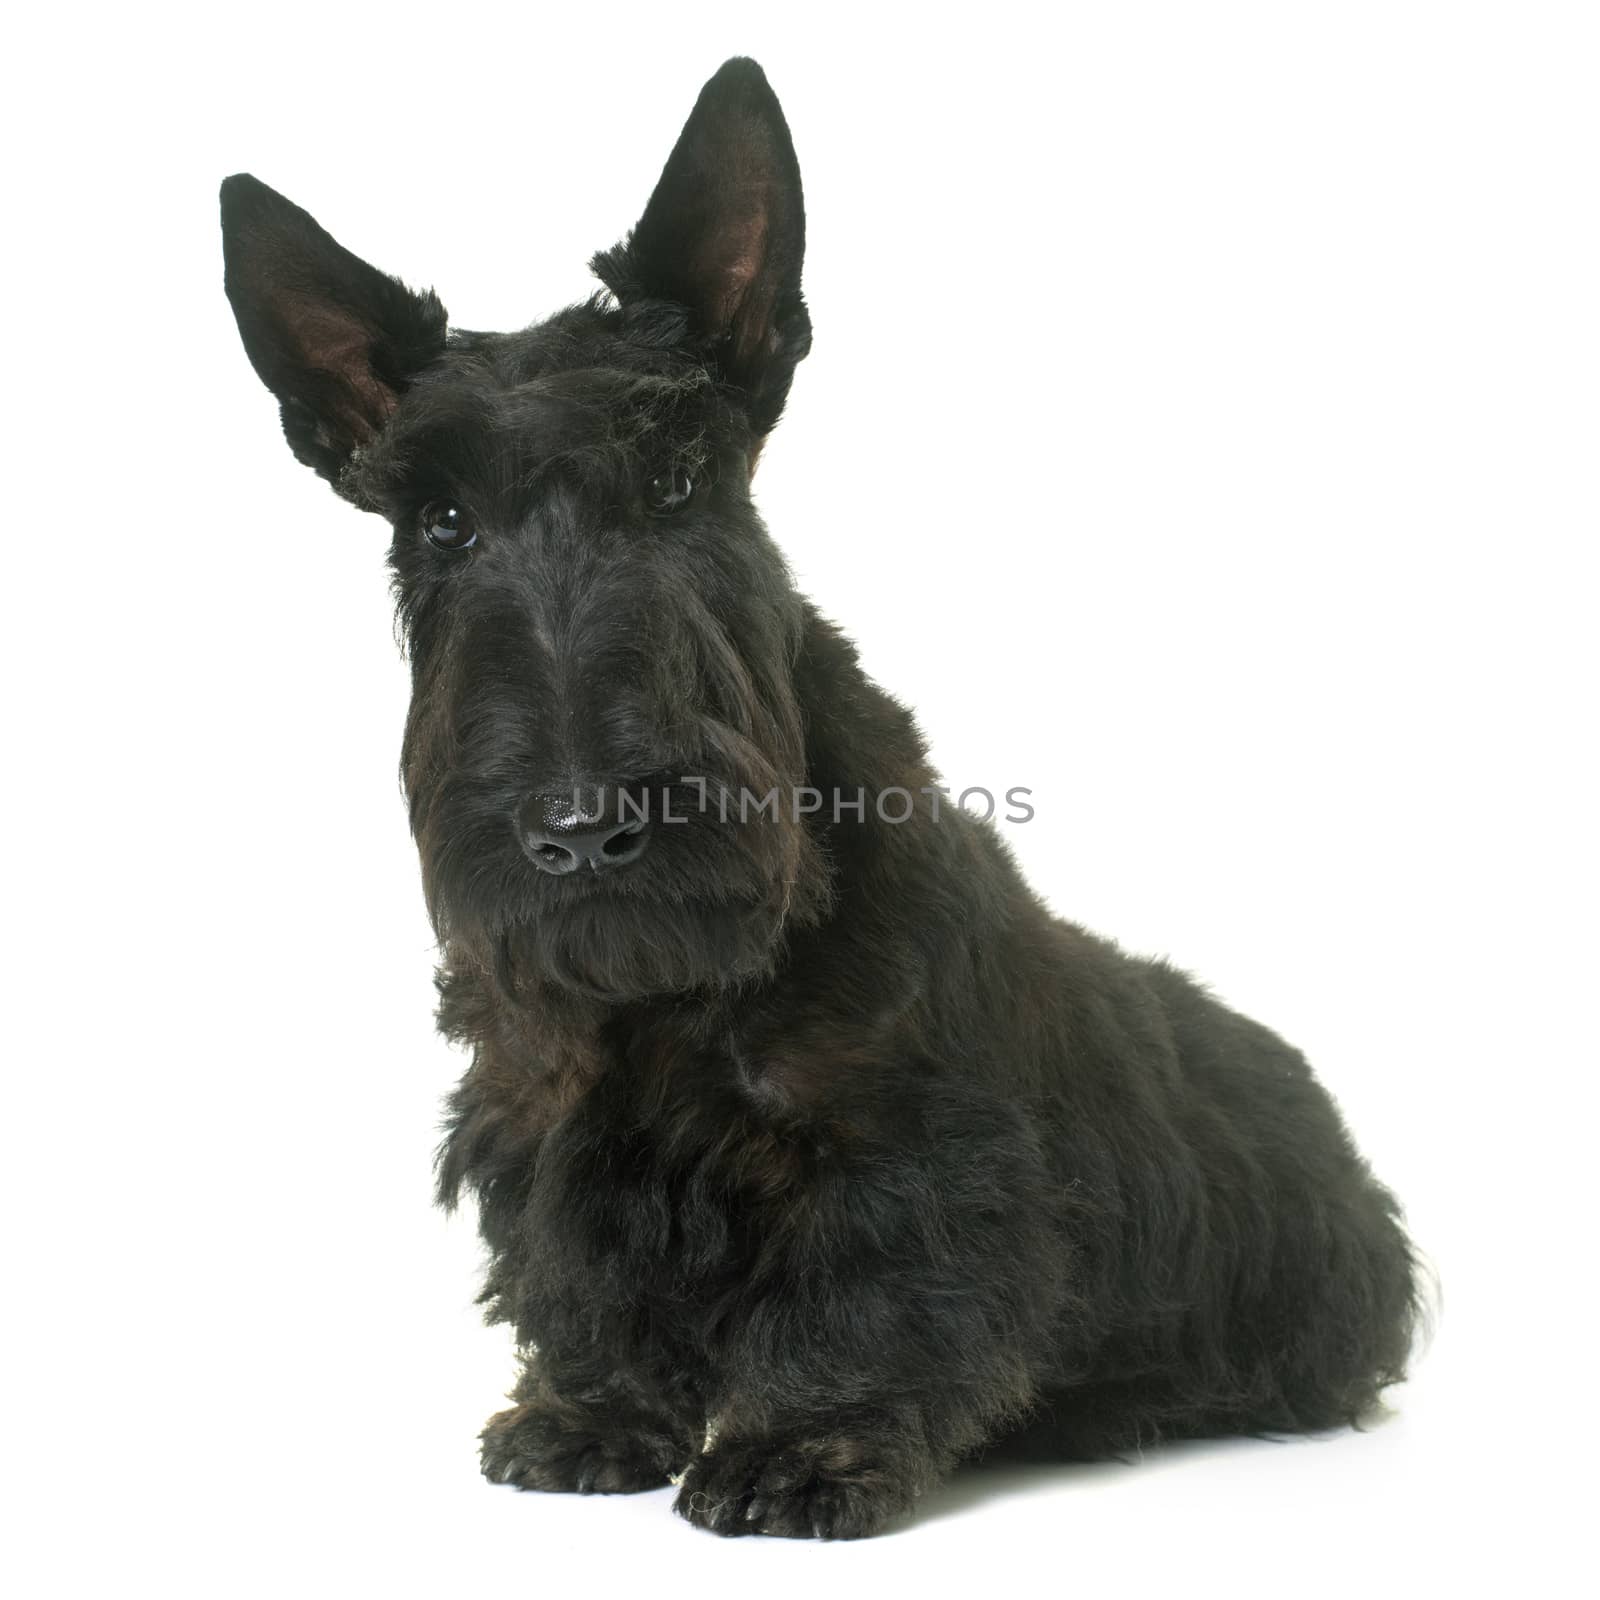 young scottish terrier by cynoclub